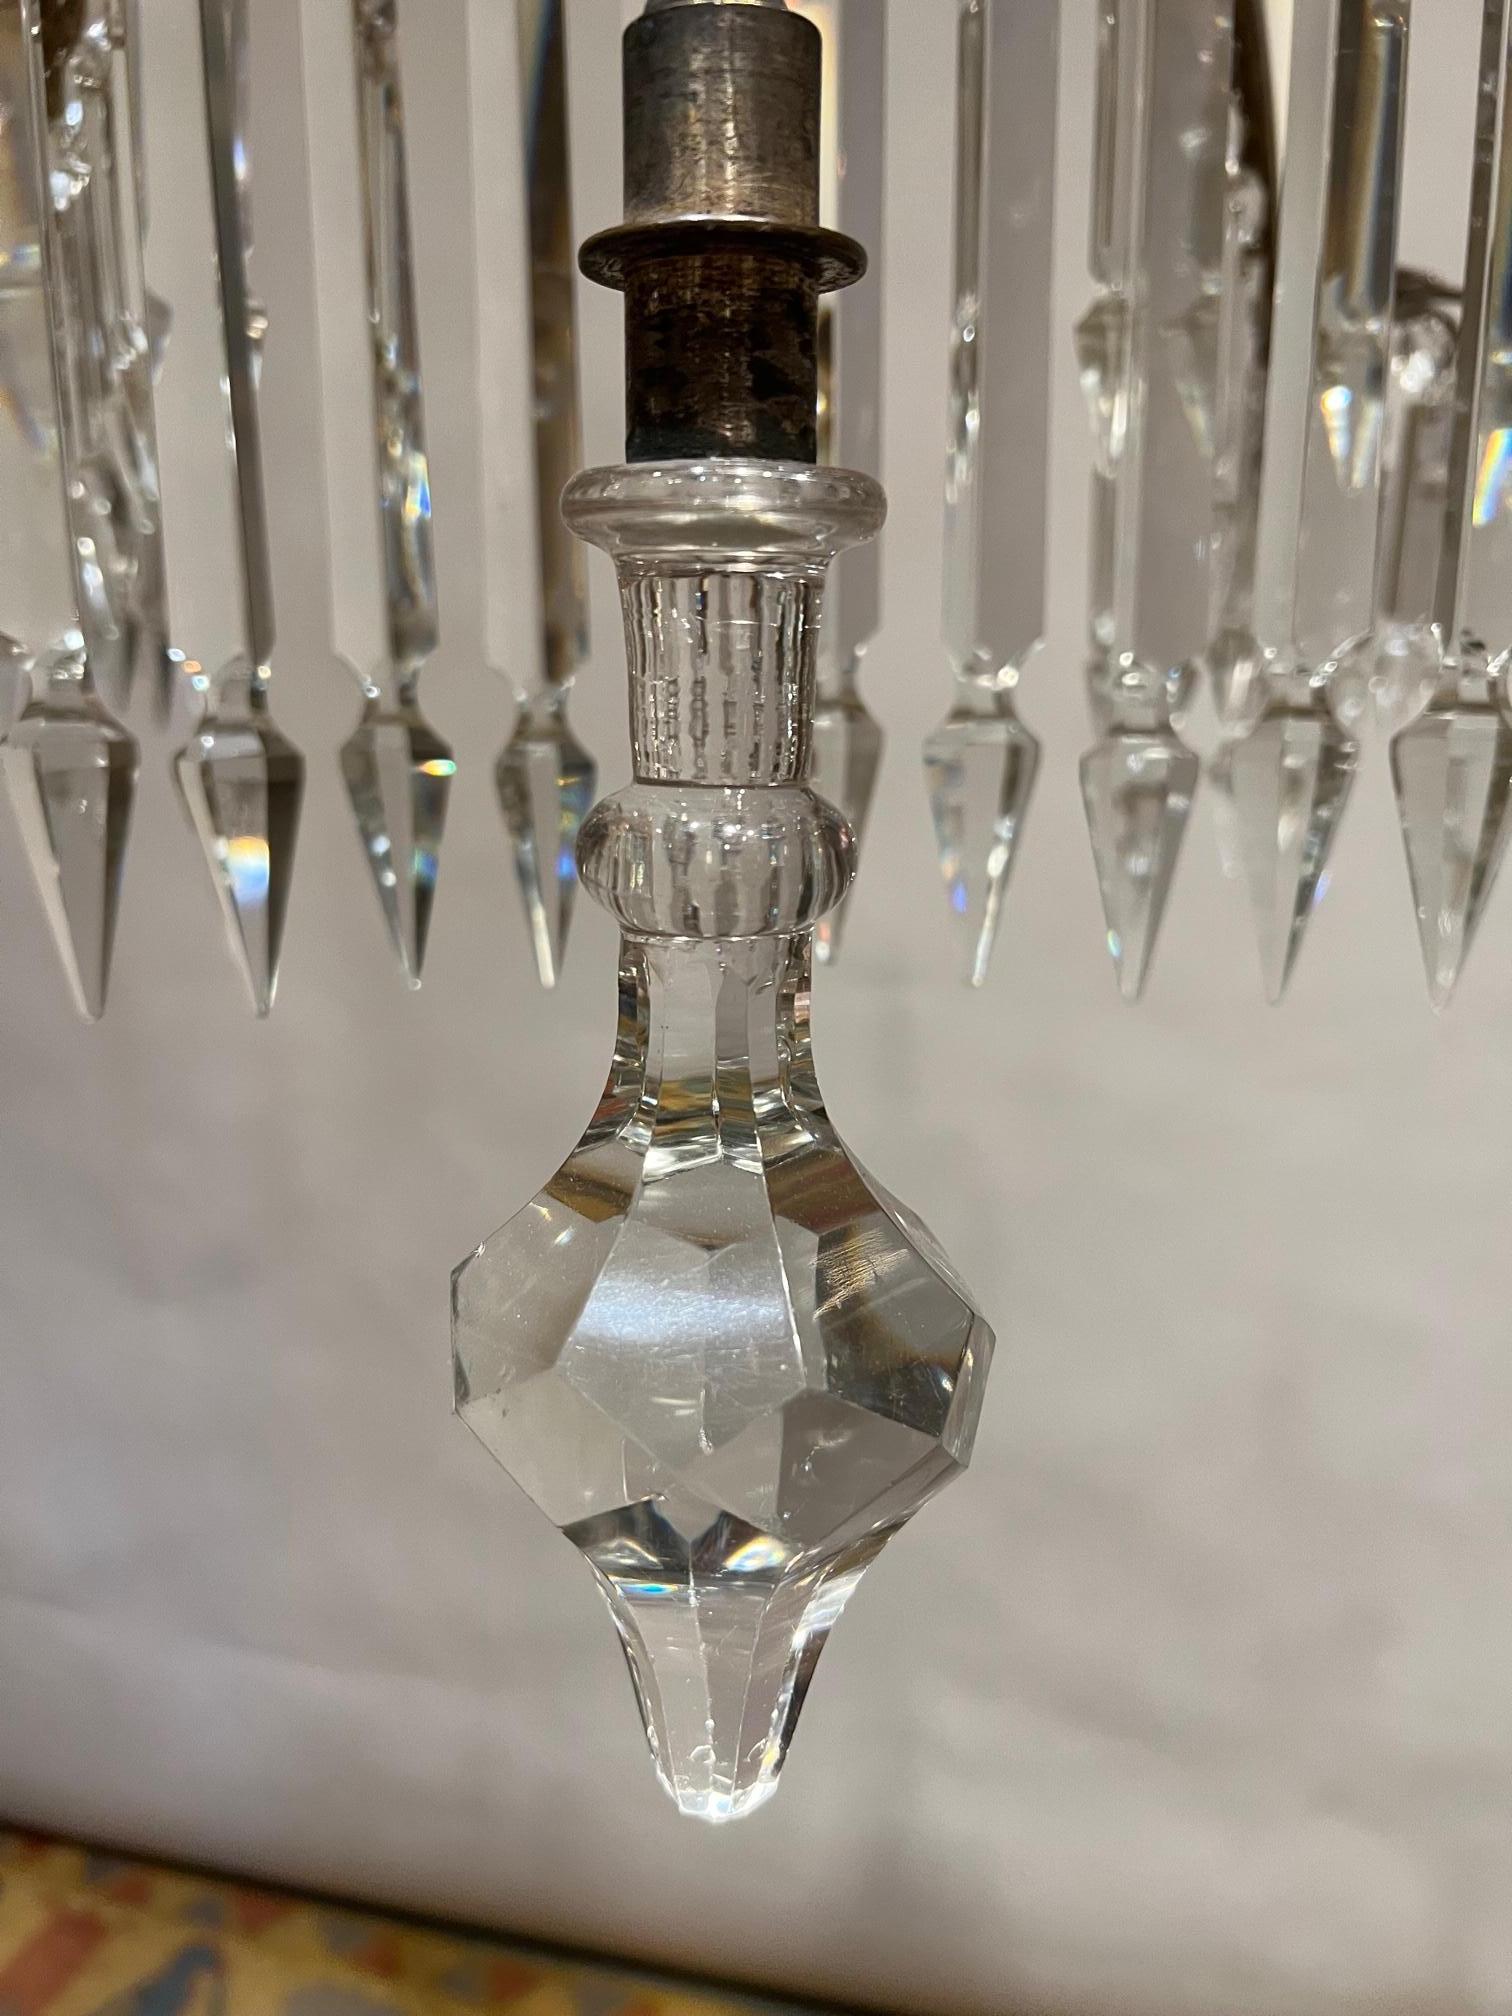 6-Light Silvered Bronze & Crystal Electrified Gasolier, America, Circa:1850 For Sale 6